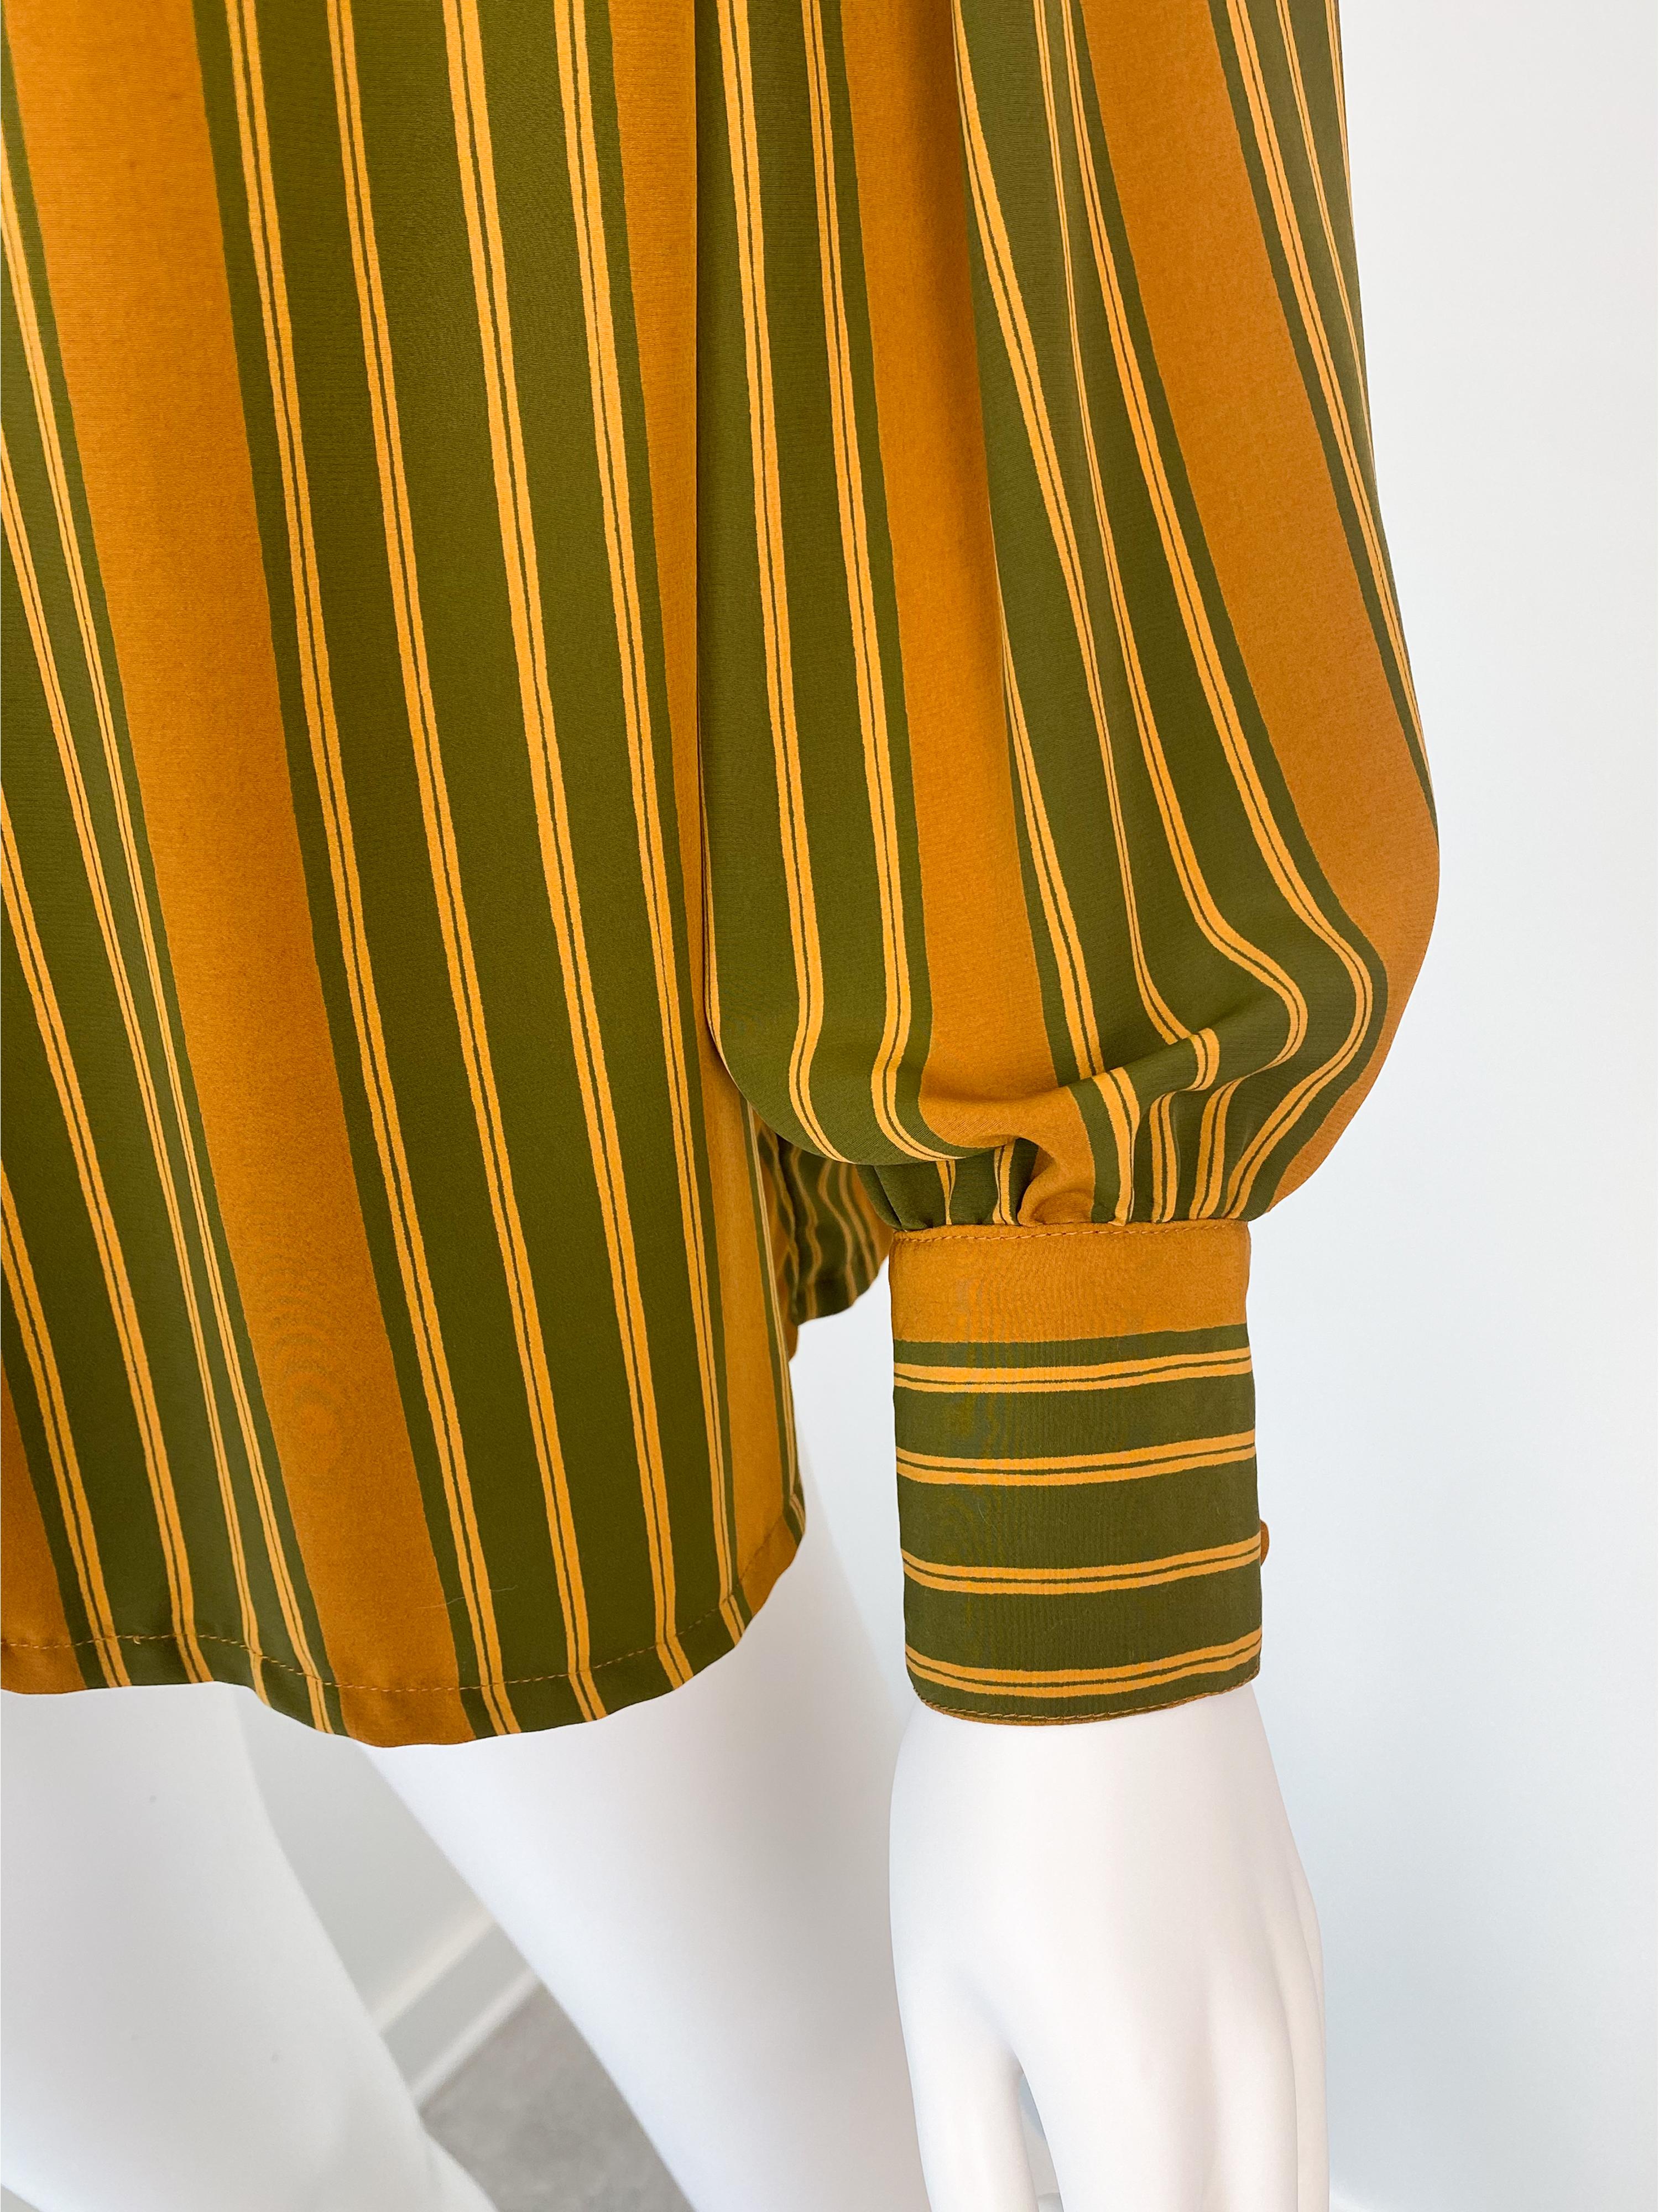 Vintage 1980s Silky Polyester Blouse Top Green and Saffran Stripes Size 10/12 For Sale 4